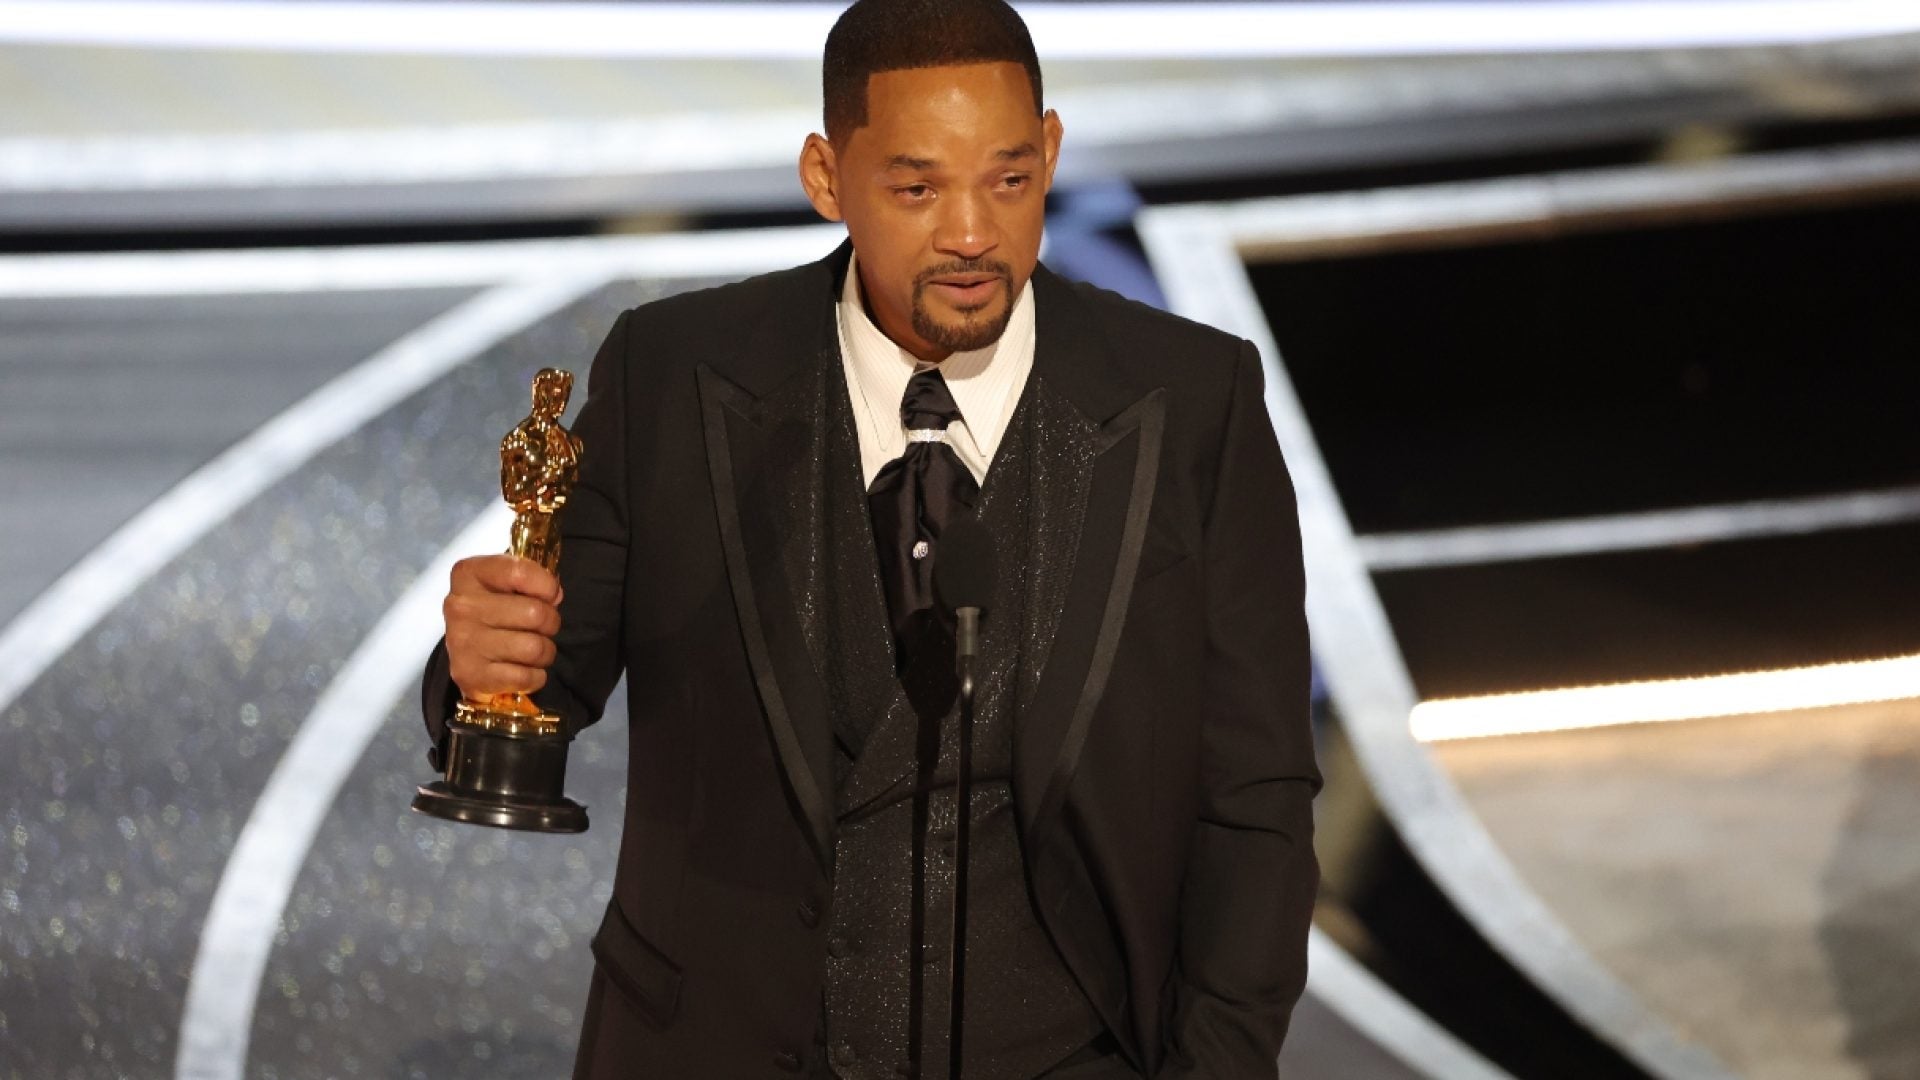 Will Smith Wins Oscar For Best Actor: 'I’m Being Called On In My Life To Love And Protect People'